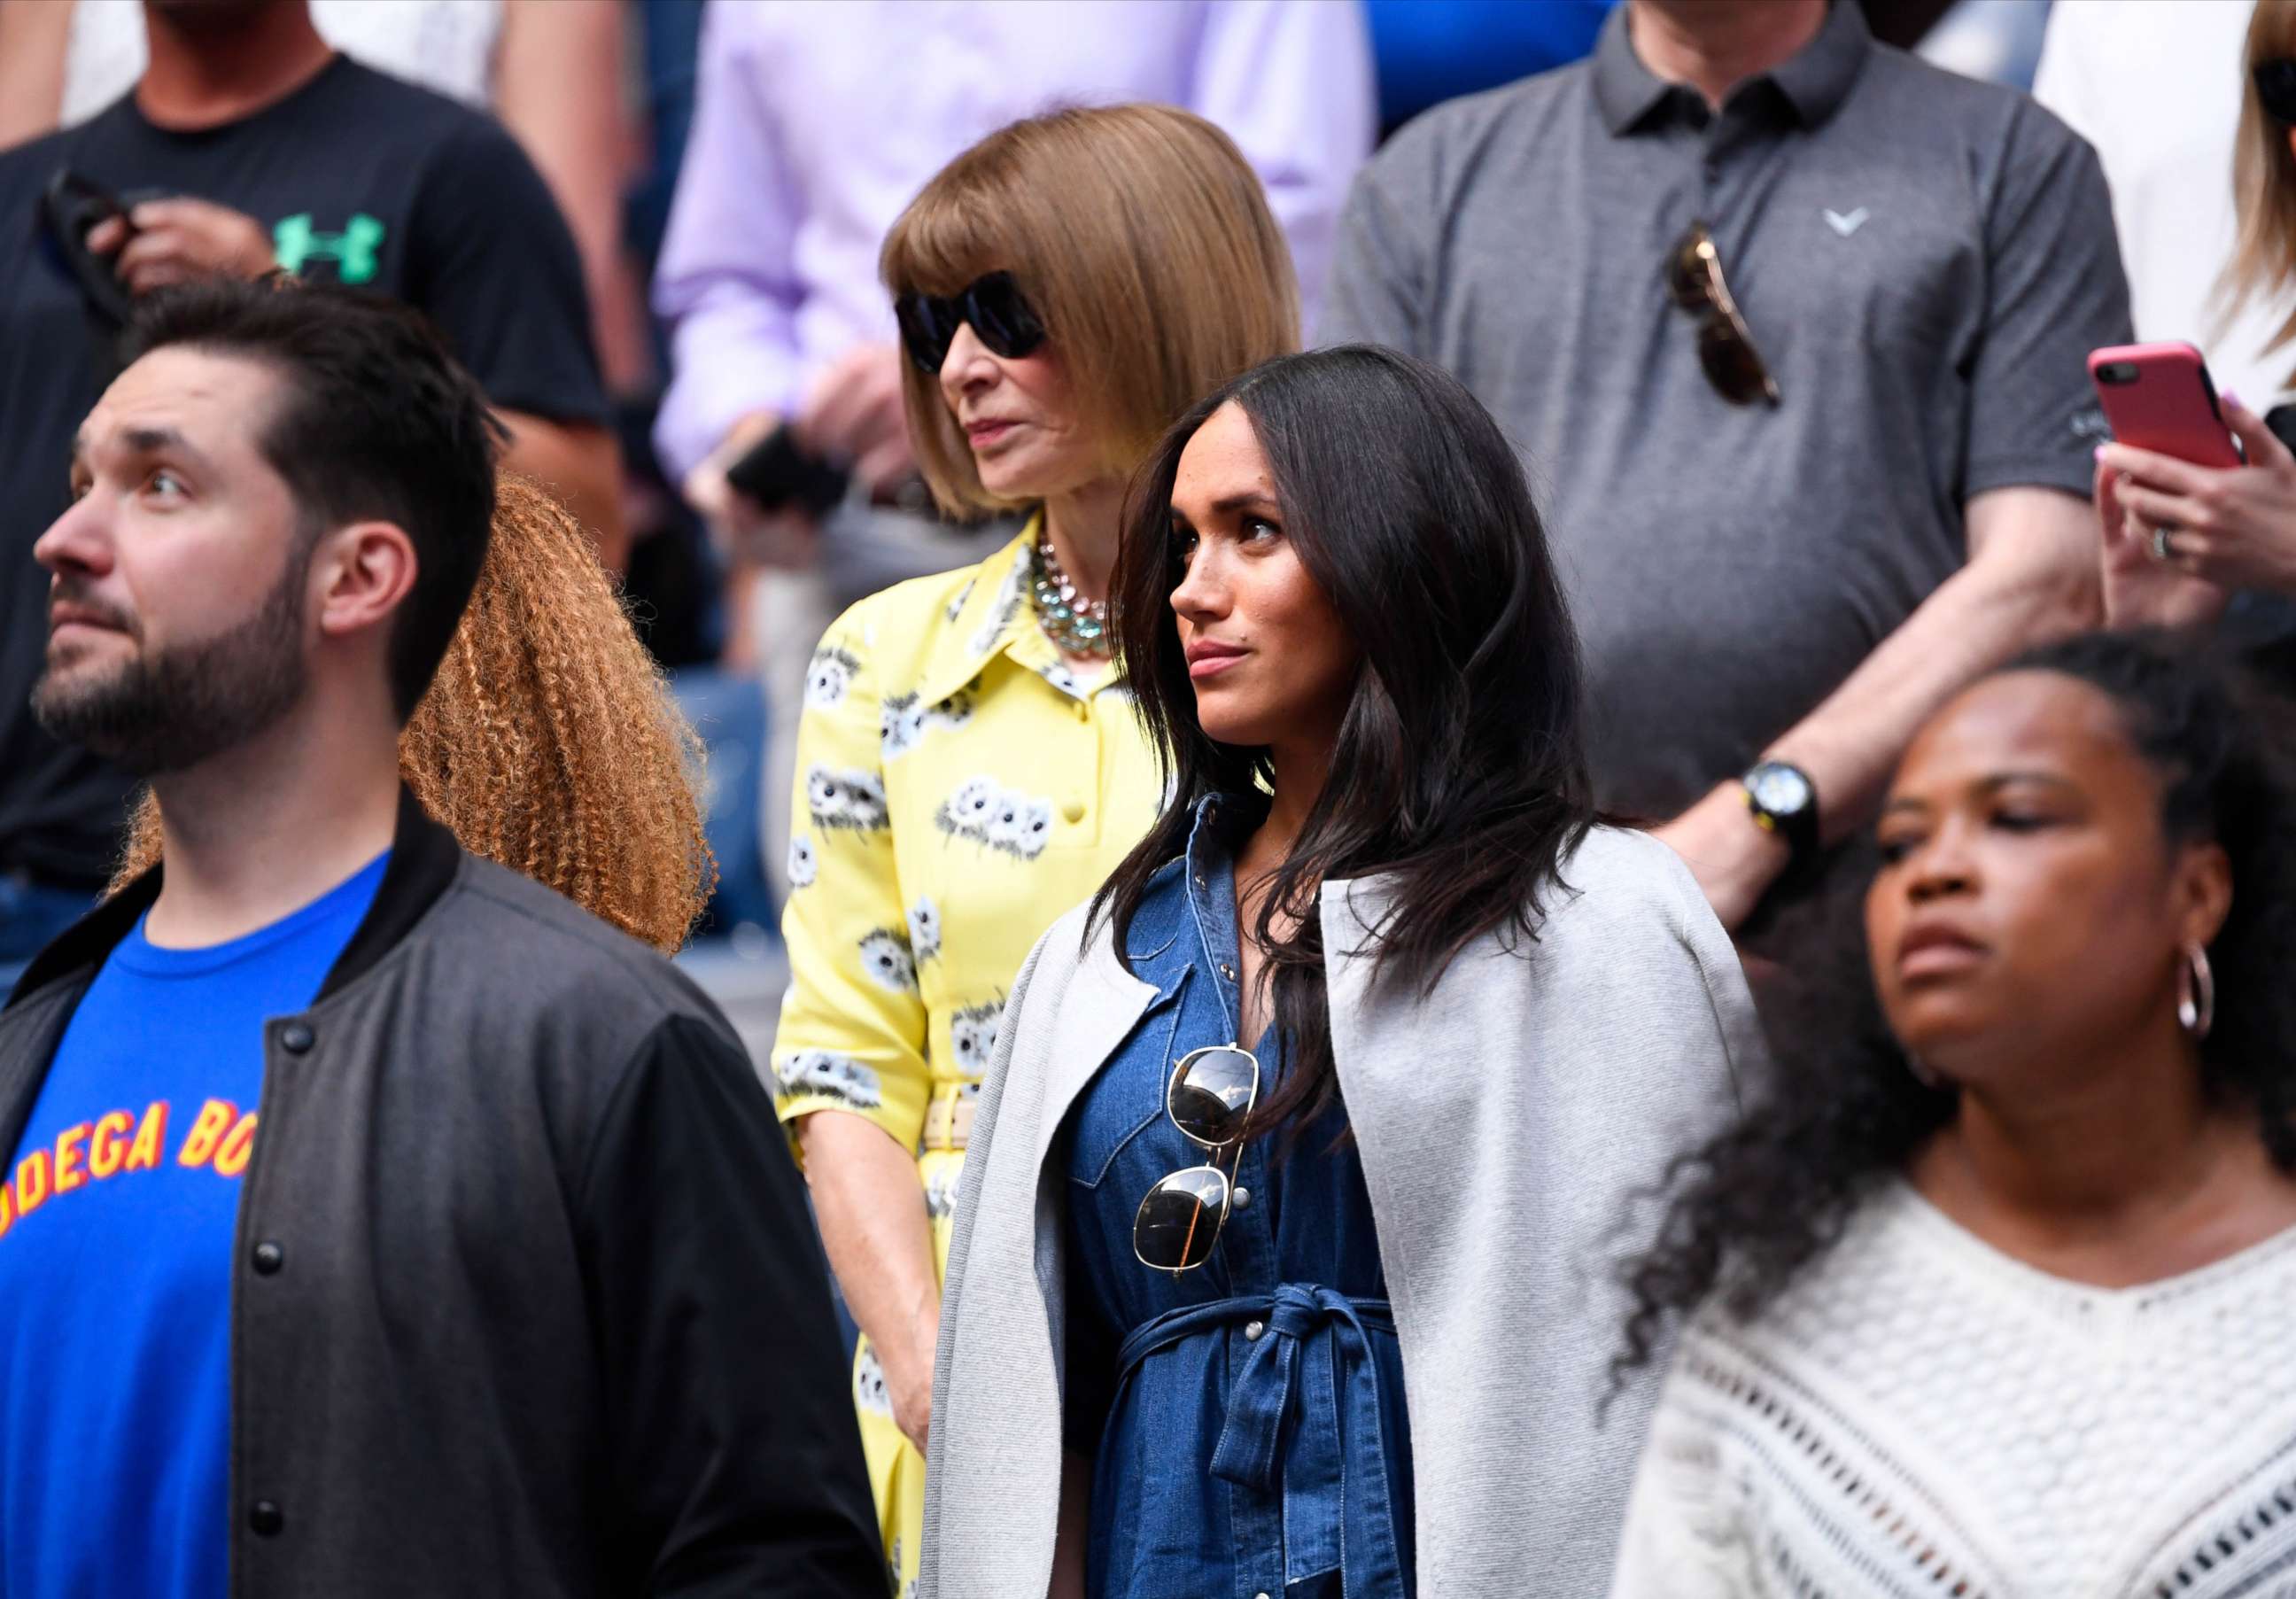 PHOTO: Meghan Markle arrives to watch the women's singles final match between Serena Williams of the United States and Bianca Andreescu of Canada on day thirteen of the 2019 U.S. Open tennis tournament at USTA Billie Jean King National Tennis Center.